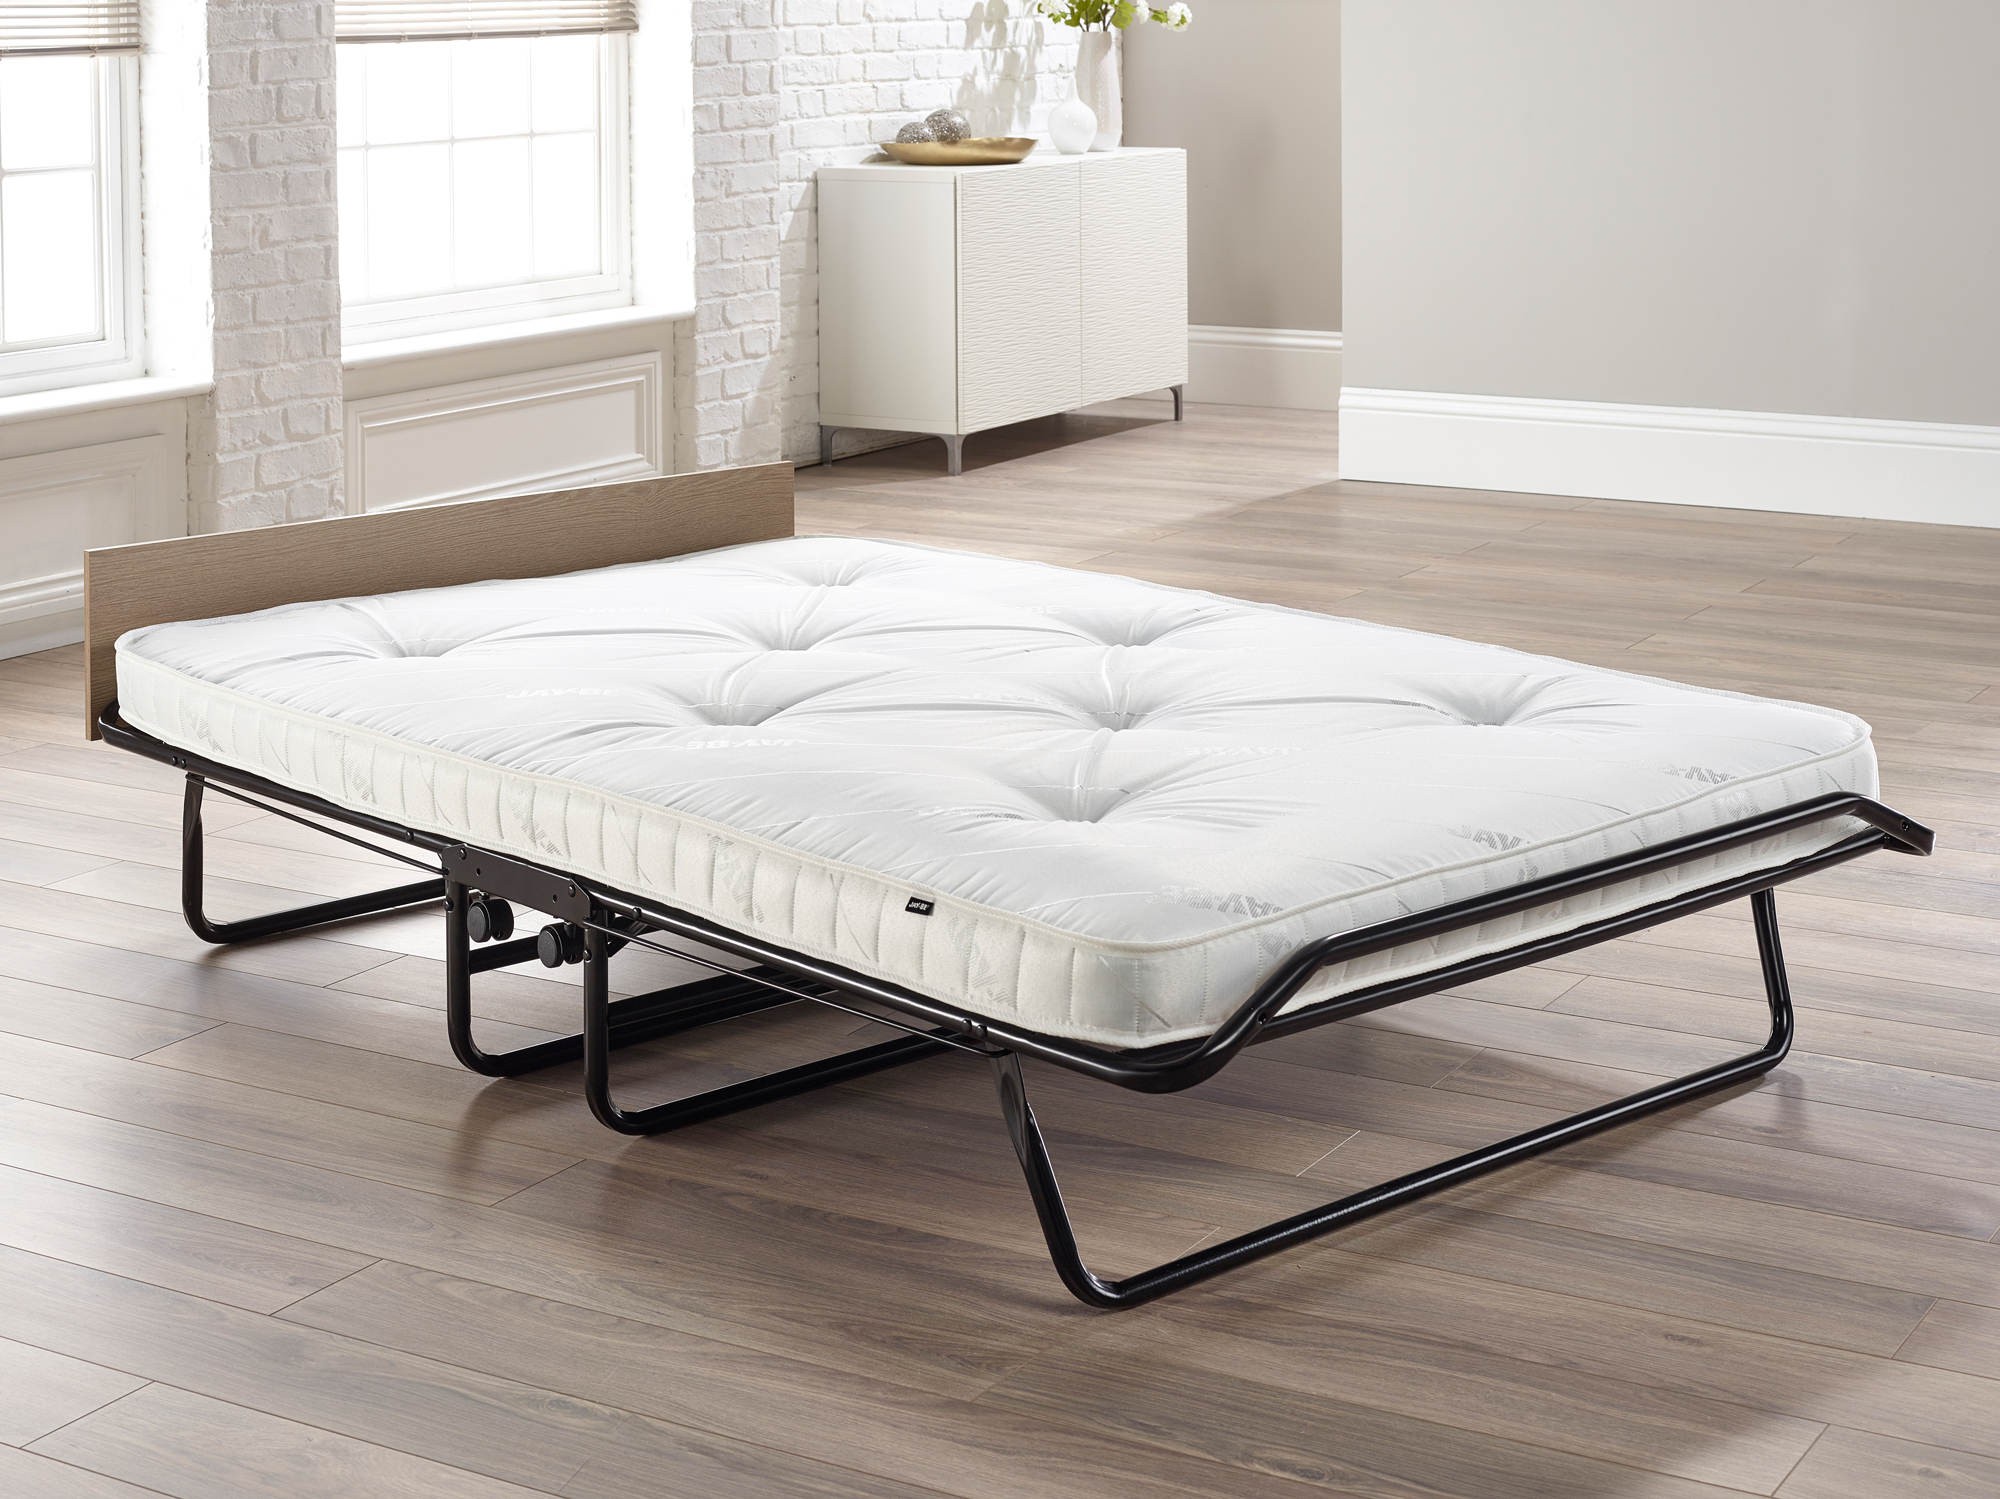 roll away beds with mattresses